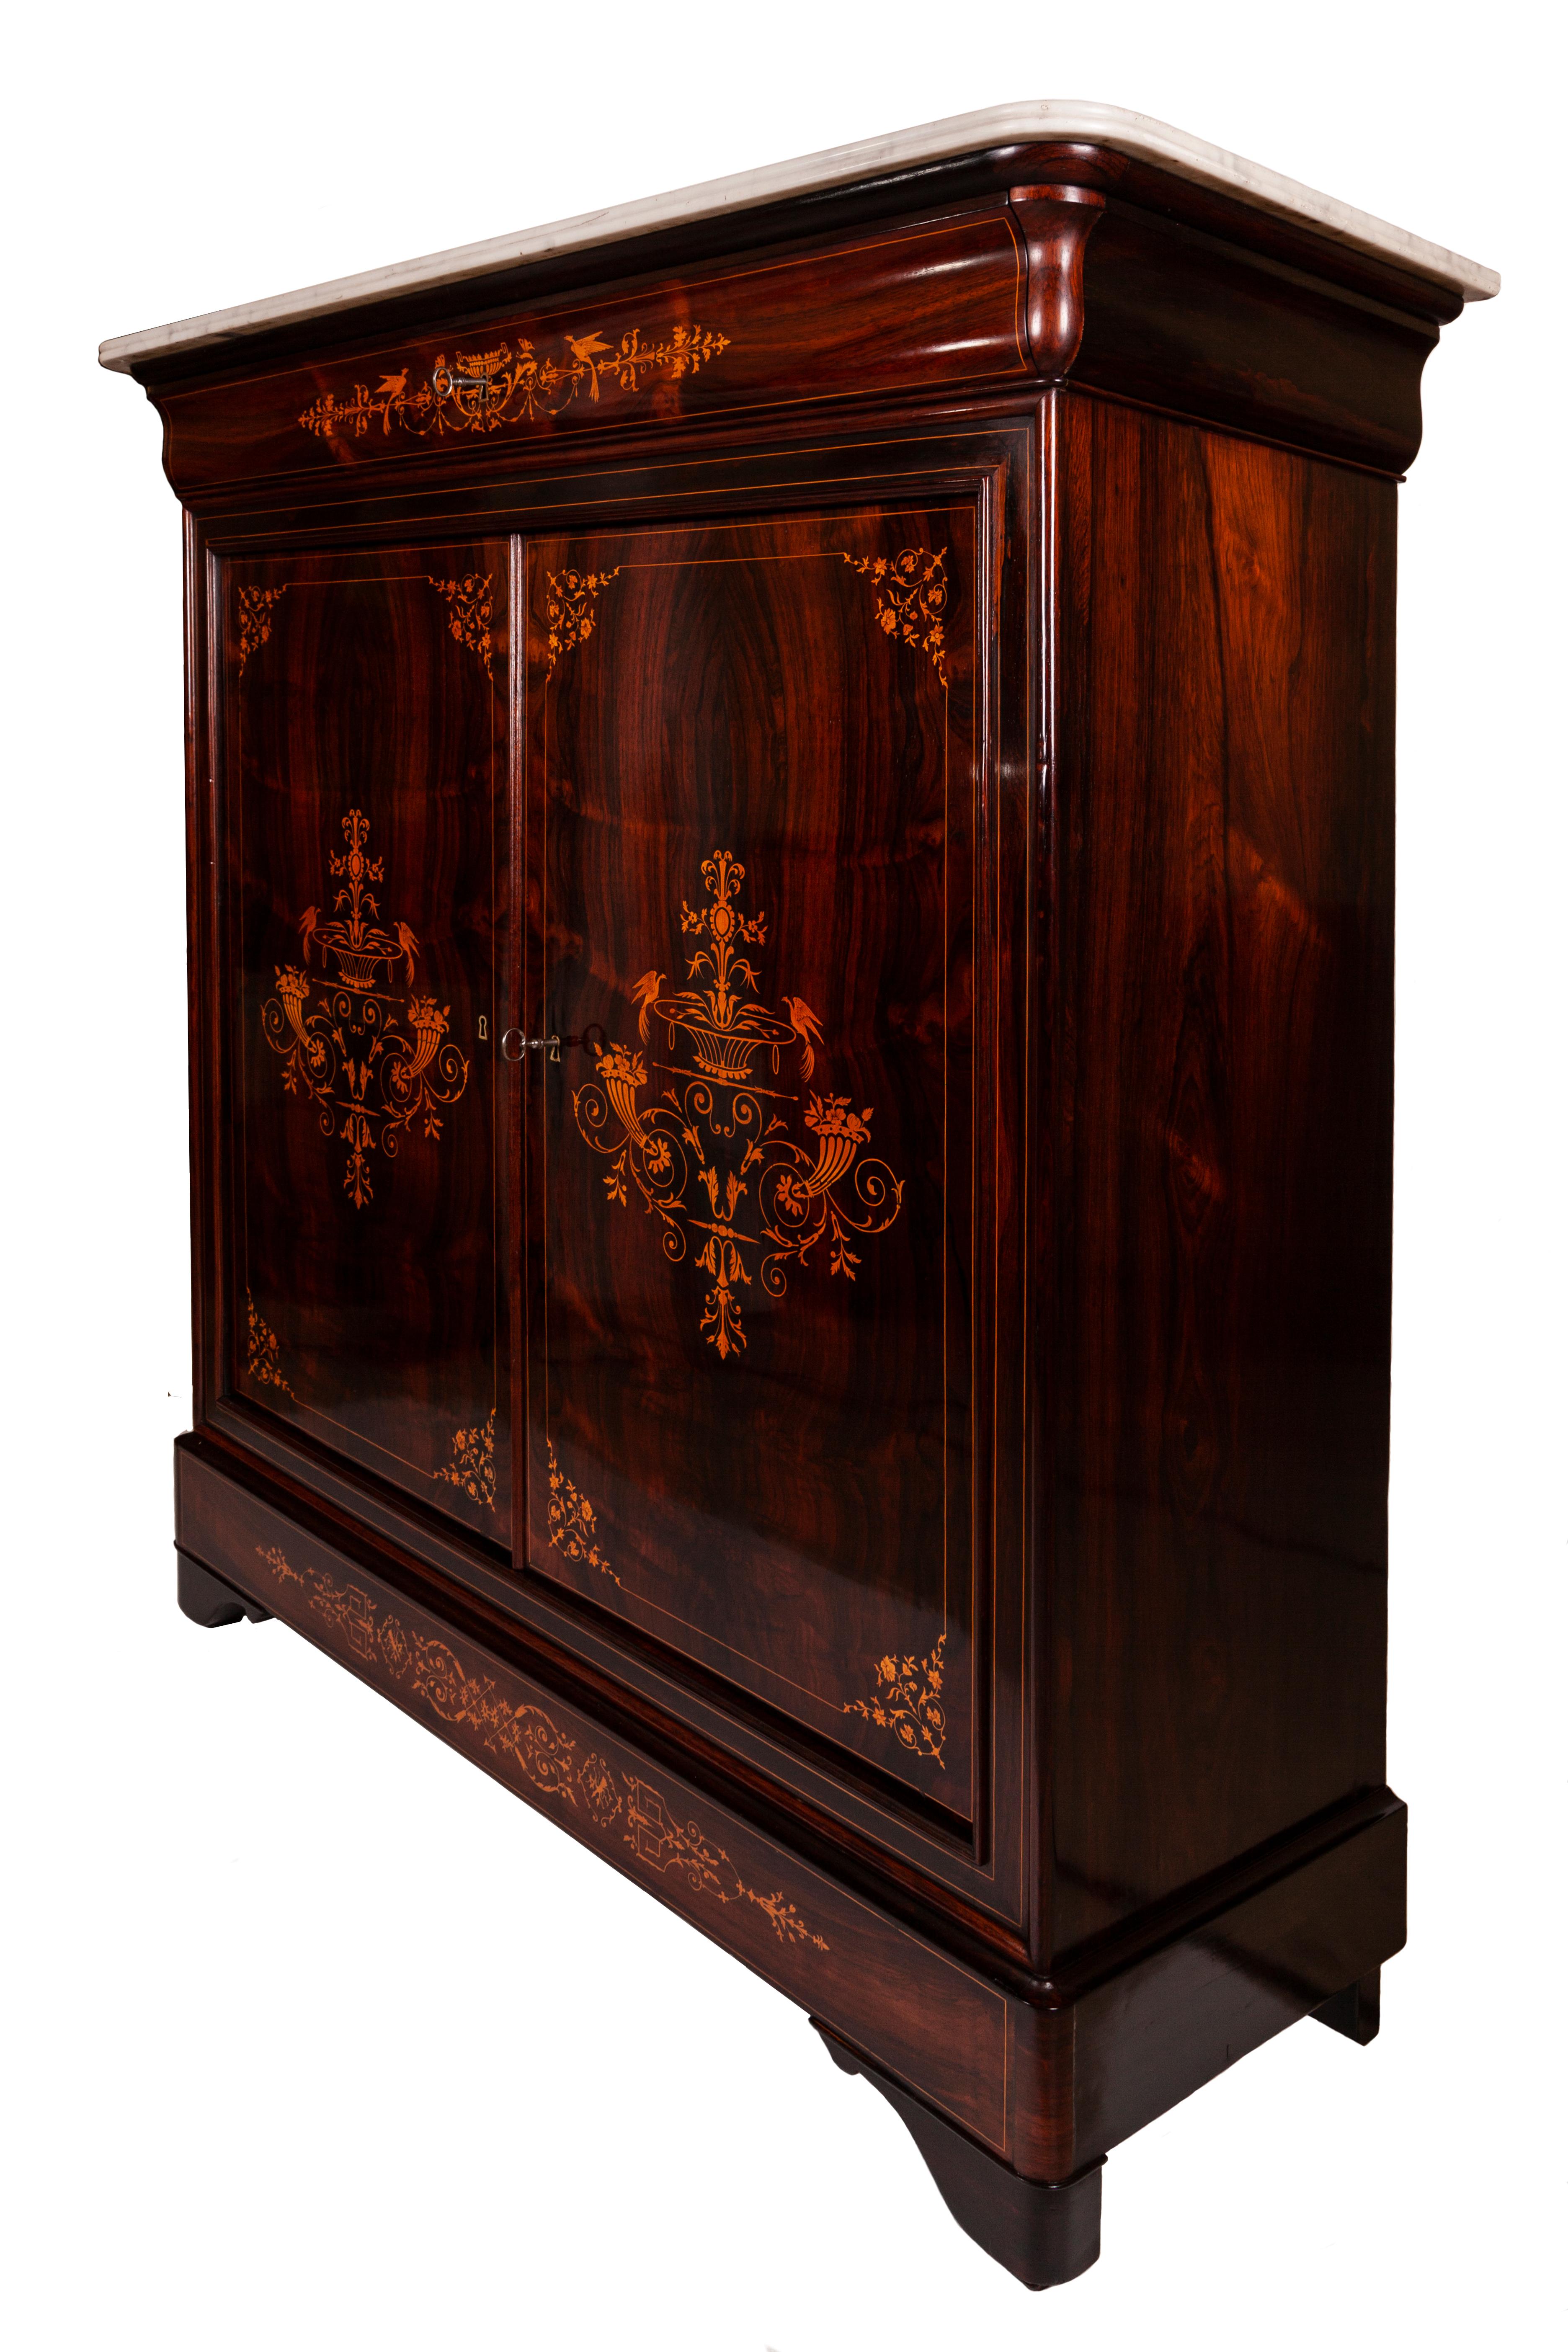 Very important and rare inlaid Carlo X Credenza in rosewood.
Well proportioned. On the facade, it has two doors and one drawer.
This piece is richly adorned with typical Carlo X's decorations (Greek holly palmettes, cornucopias, lozenges) which